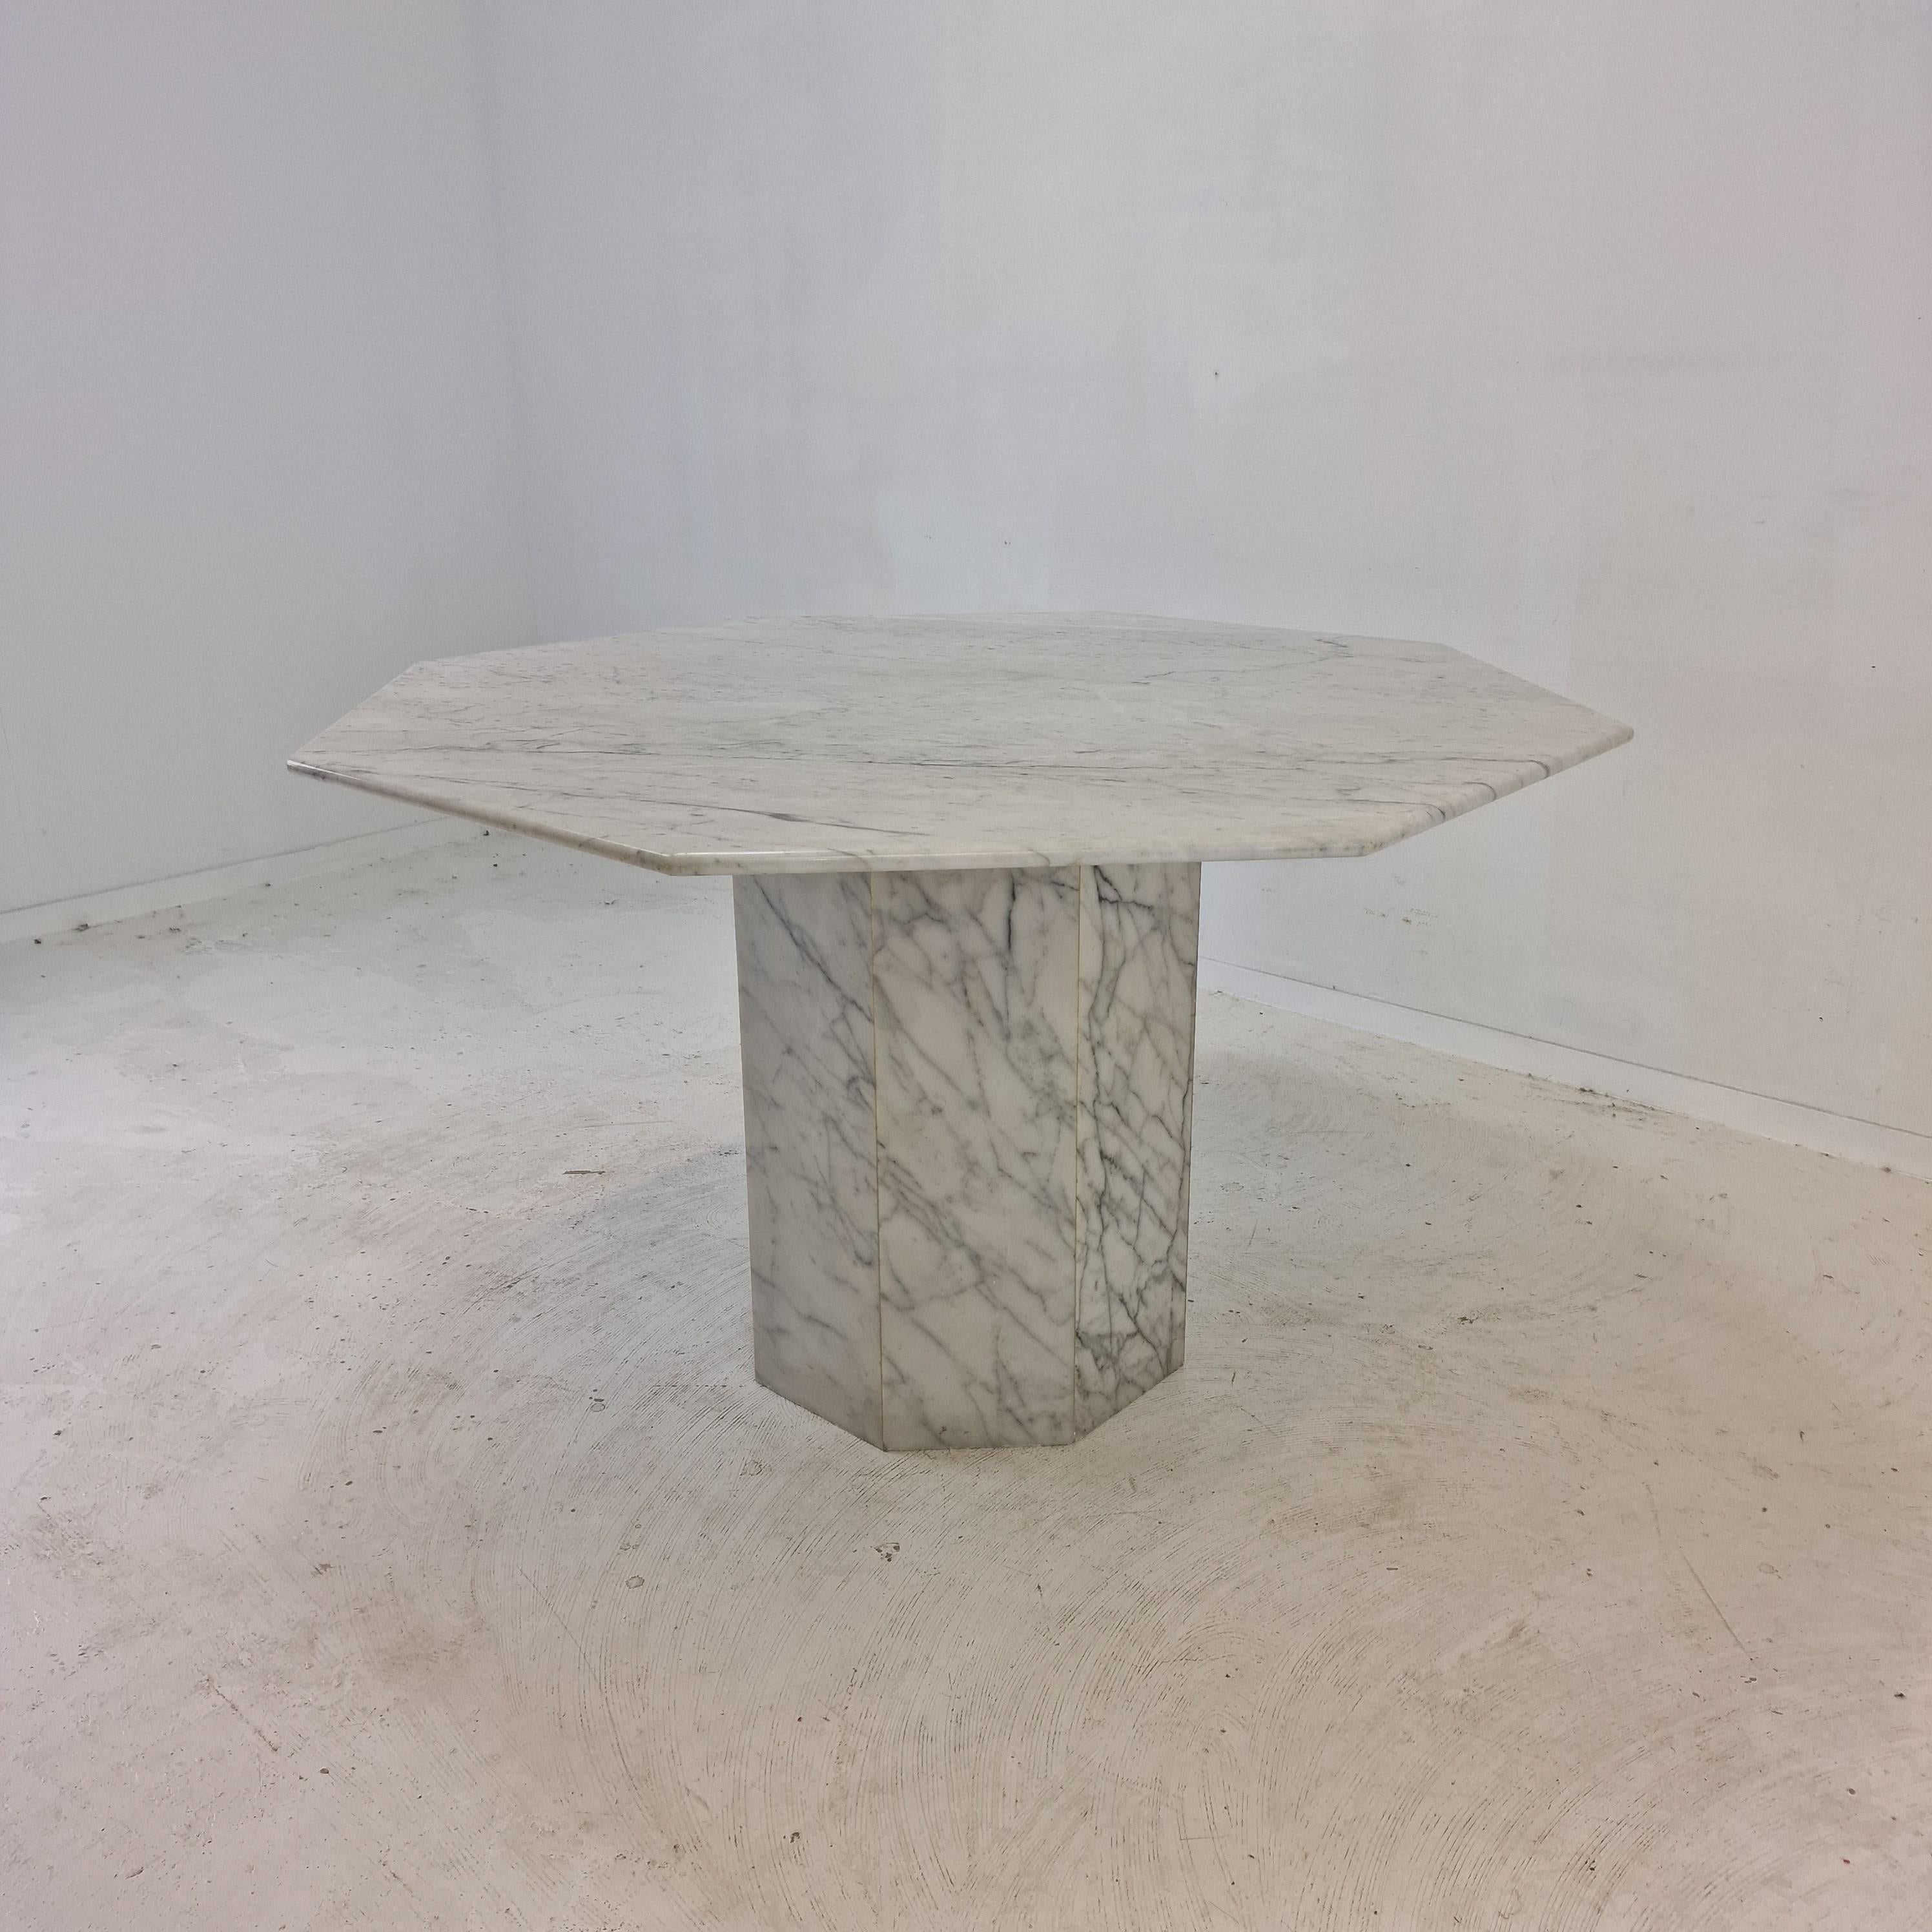 Hand-Crafted Italian Carrara Marble Octagon Garden or Dining Table, 1960s For Sale